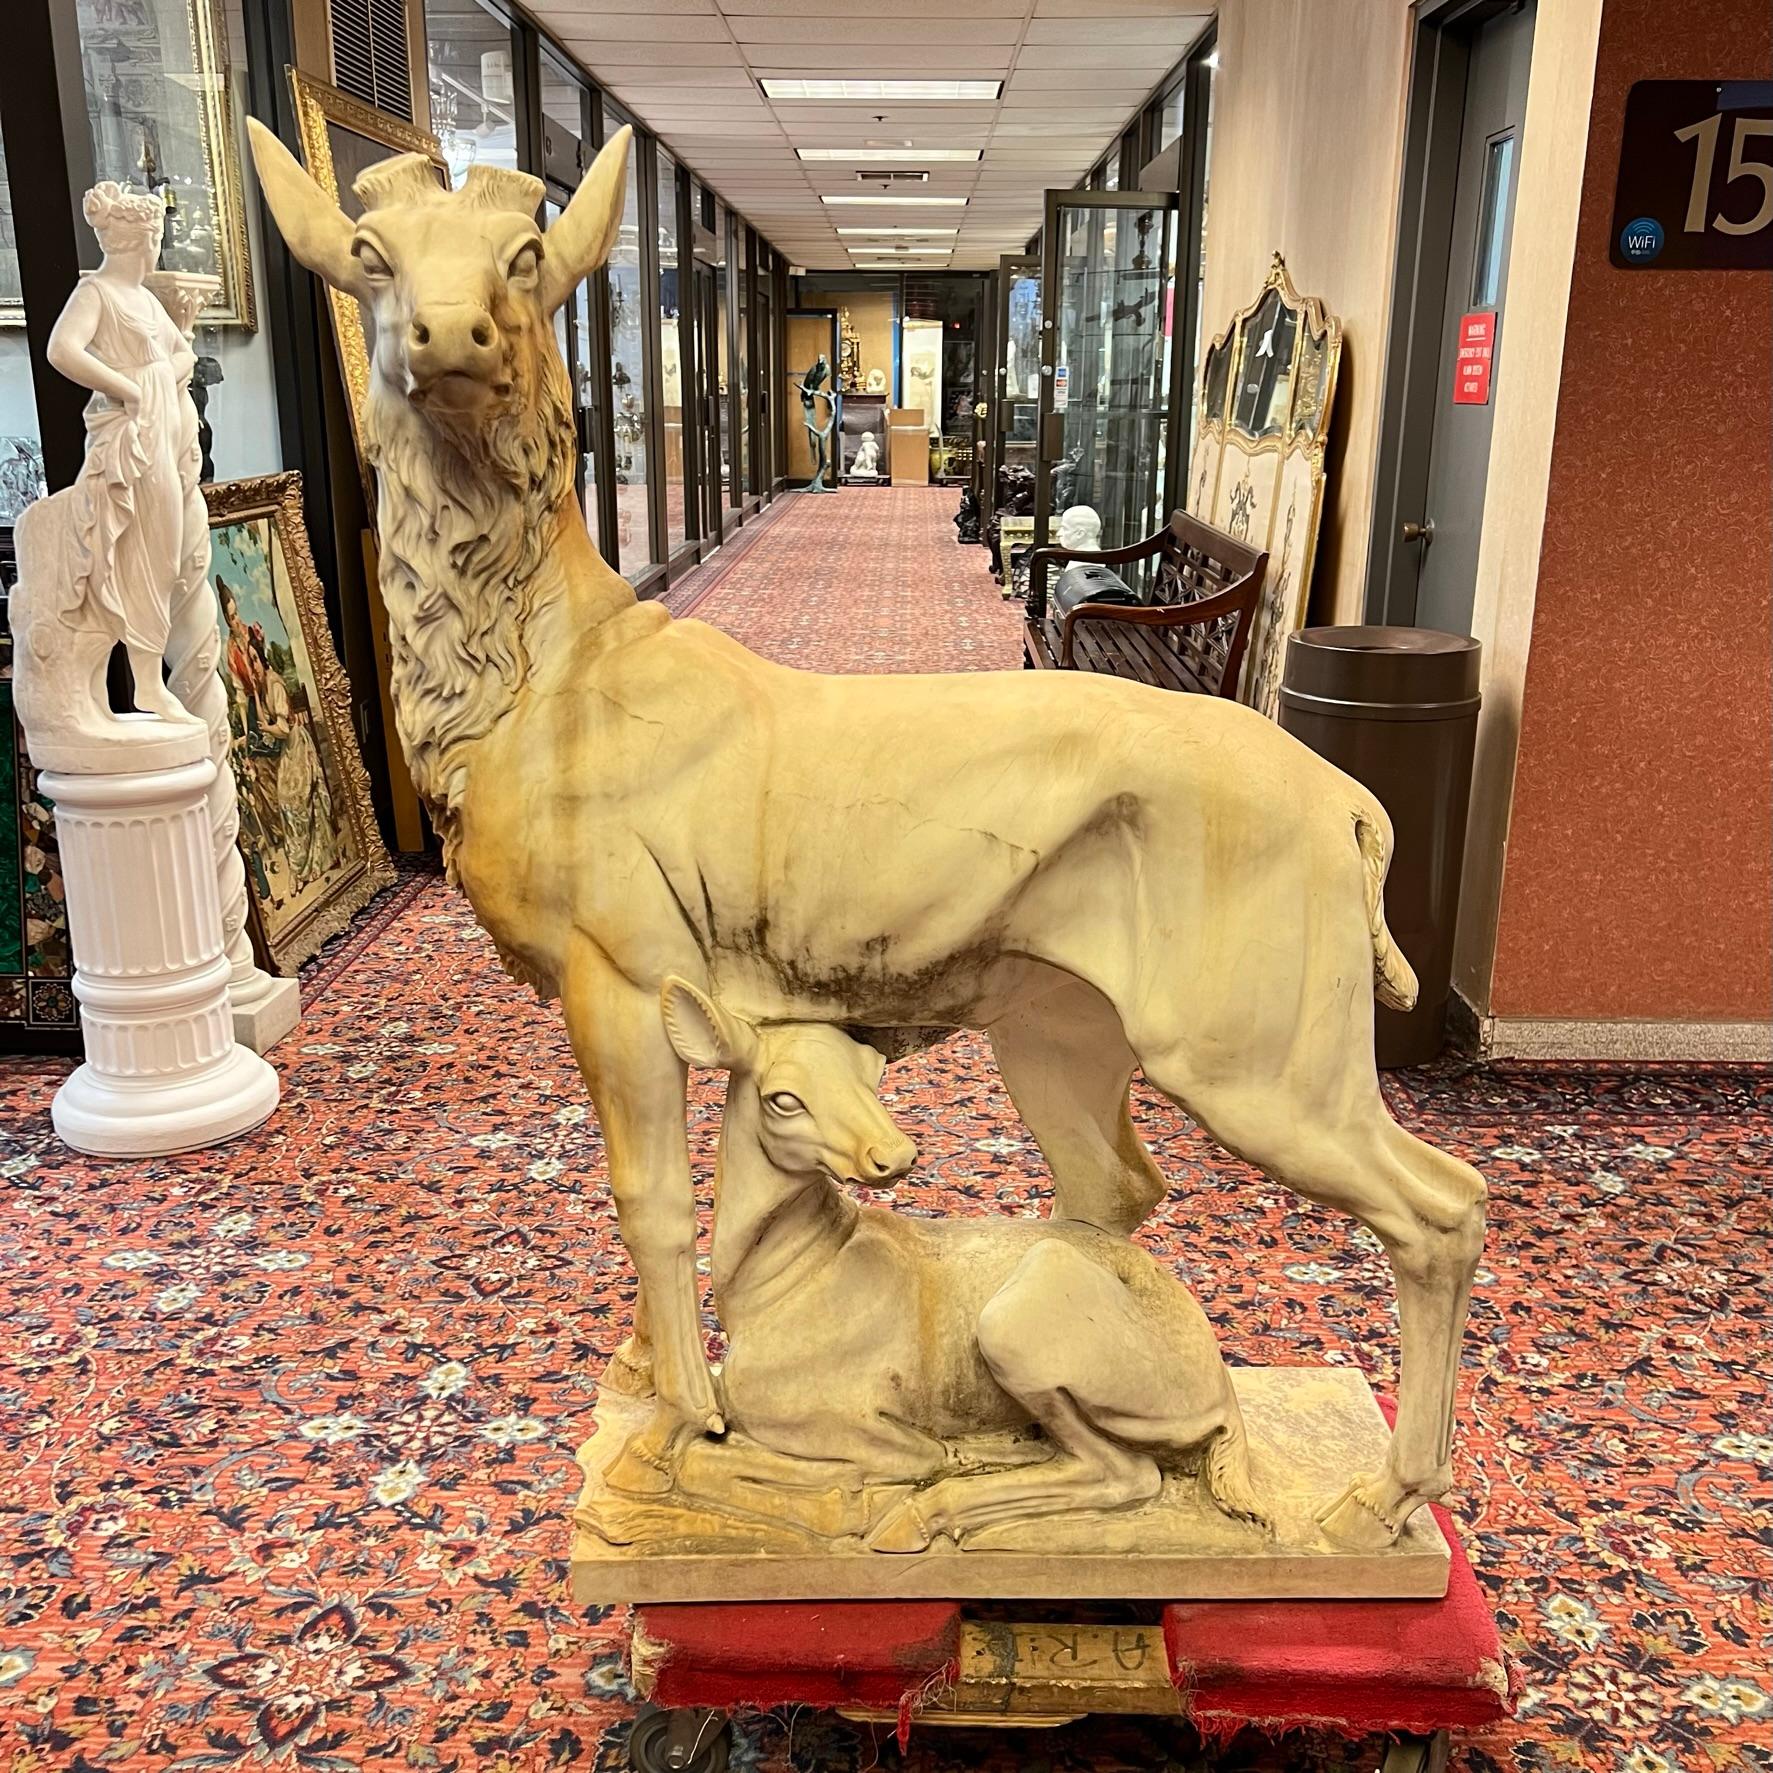 Our monumental marble sculpture of a standing buck deer and fawn at his feet measures 53 inches tall and dates from the late 19th century. Apparently unsigned. In good condition with weathered surface from exhibition outdoors.